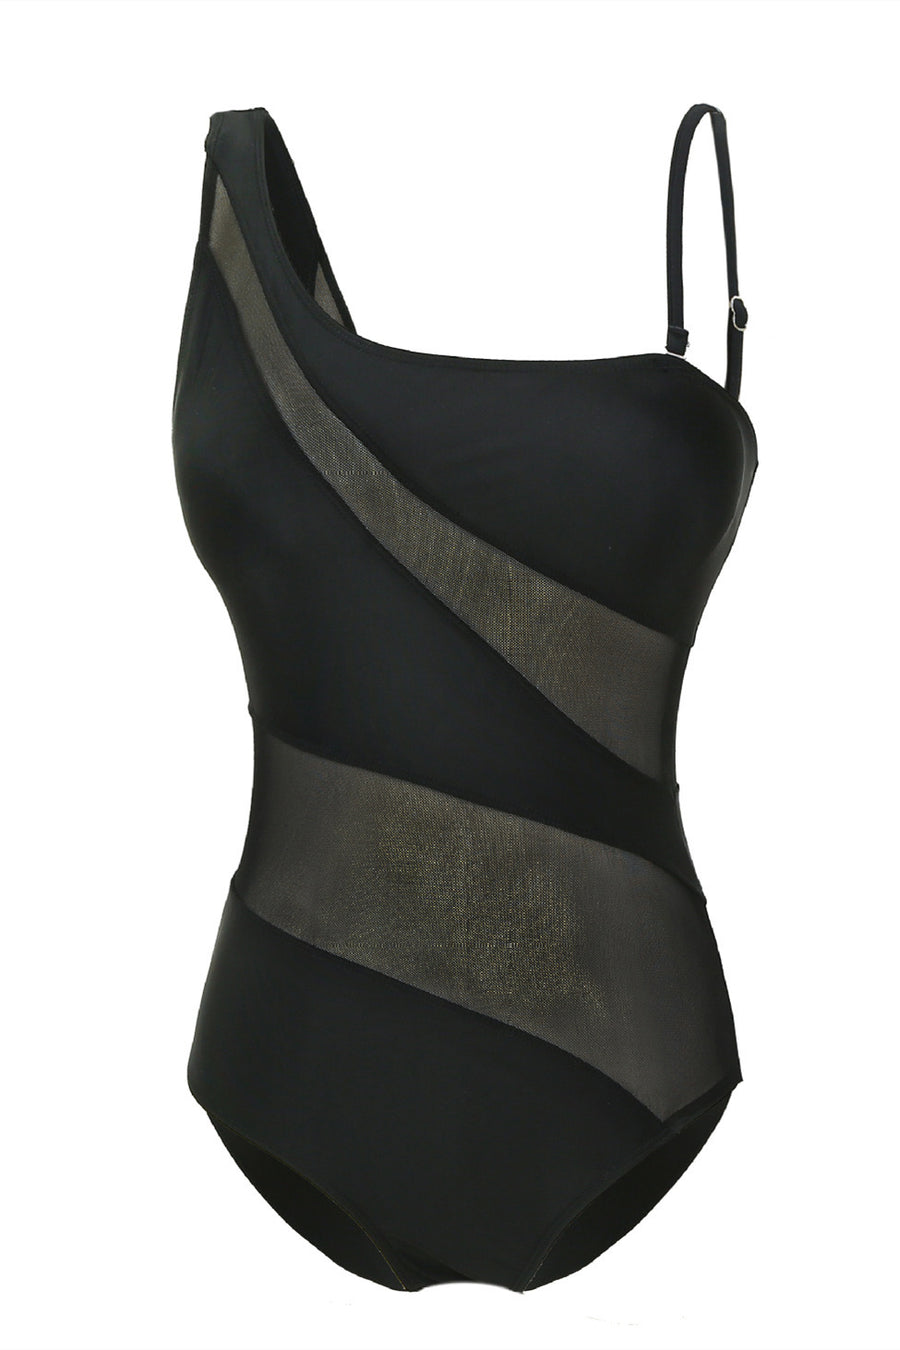 Black Mesh One Shoulder Swimsuit - One Piece – Mocca Beach Store